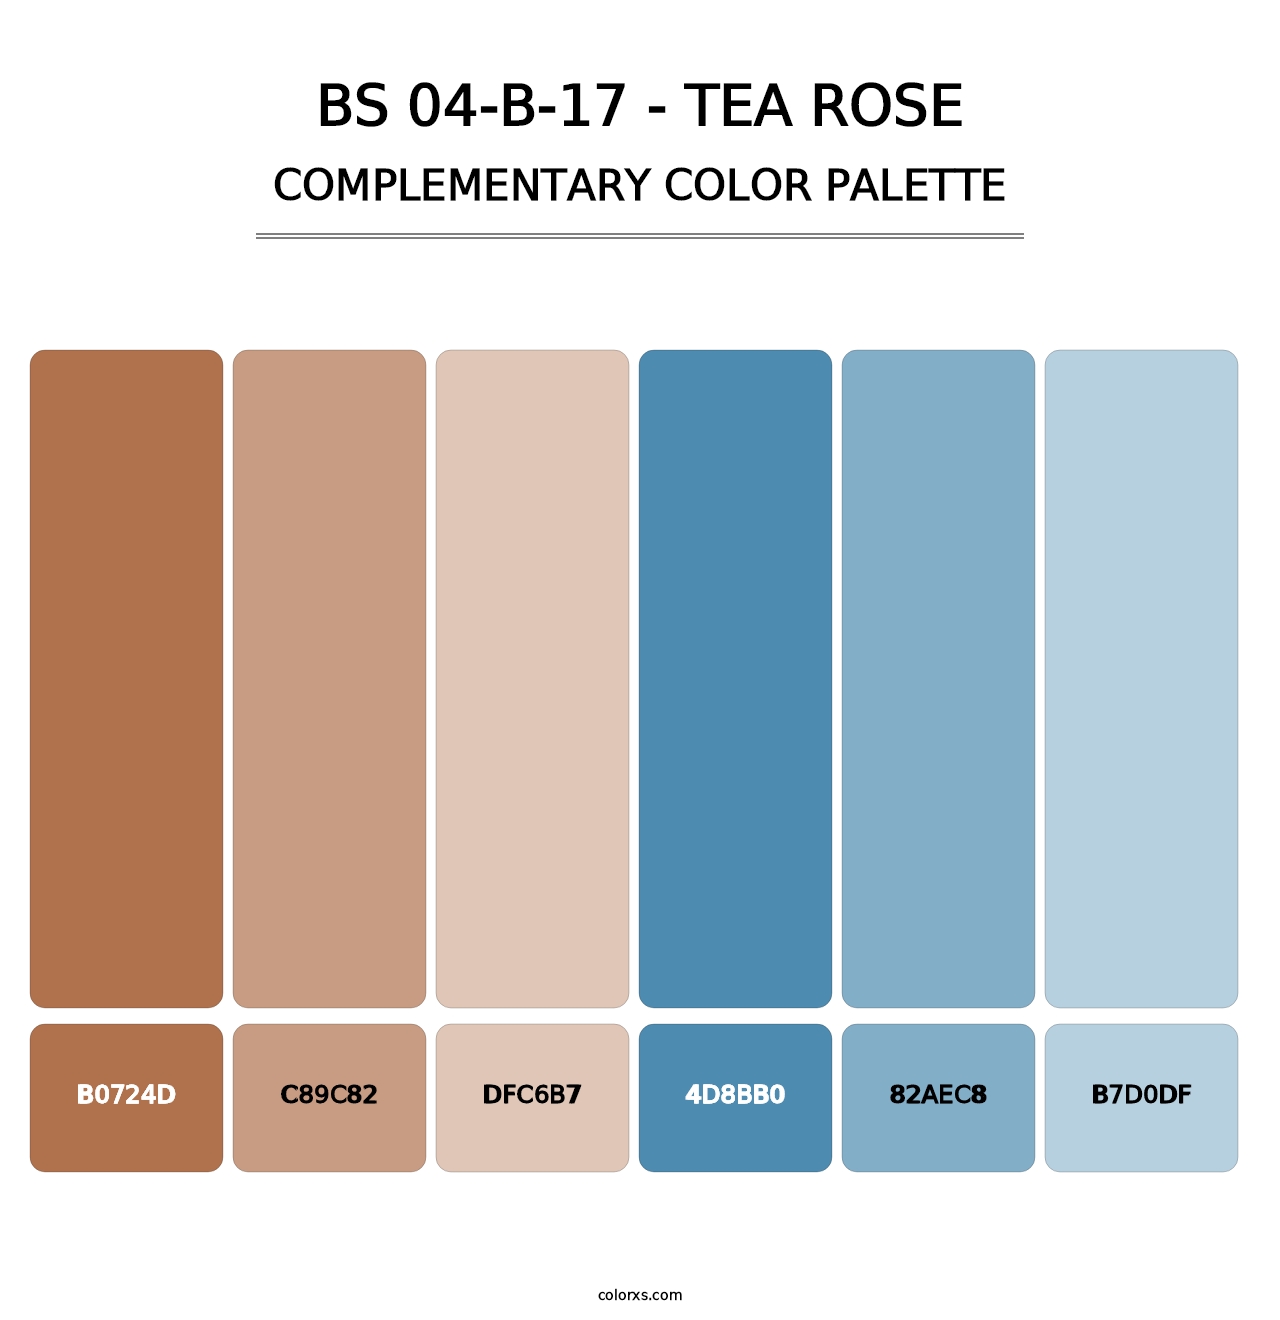 BS 04-B-17 - Tea Rose - Complementary Color Palette